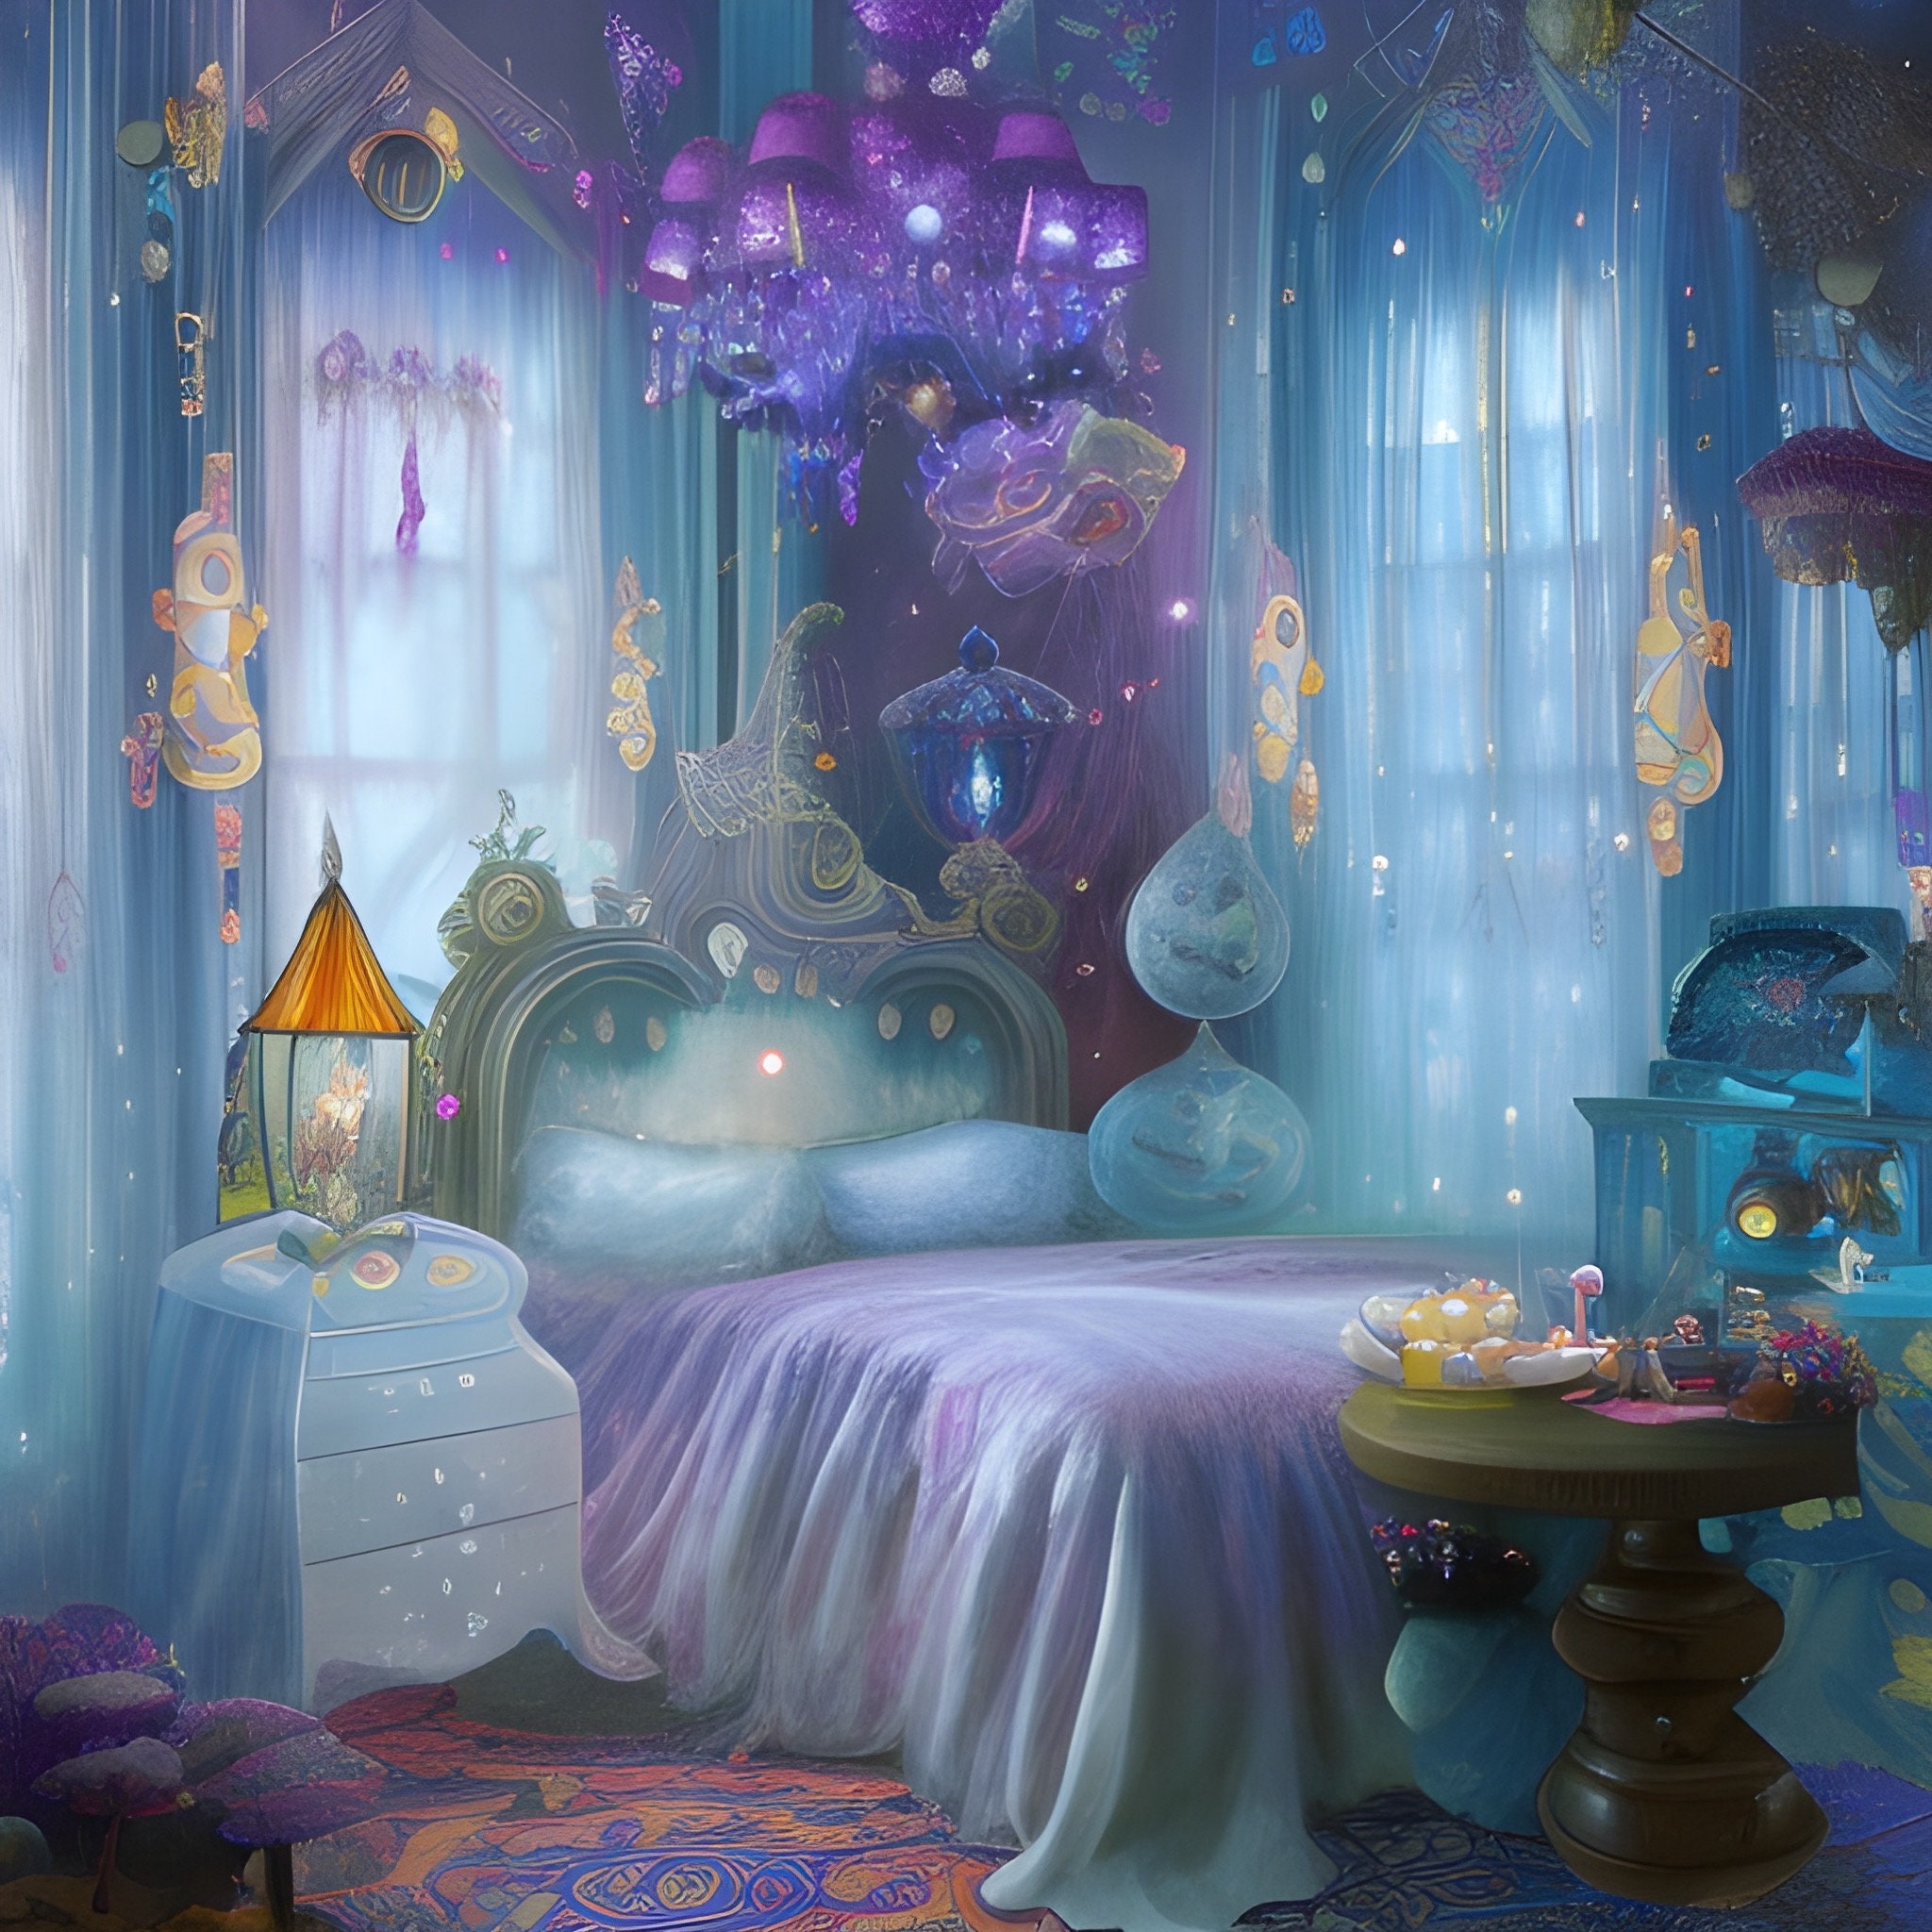 Fantasy air collection the perfect bedroom decor to this winter